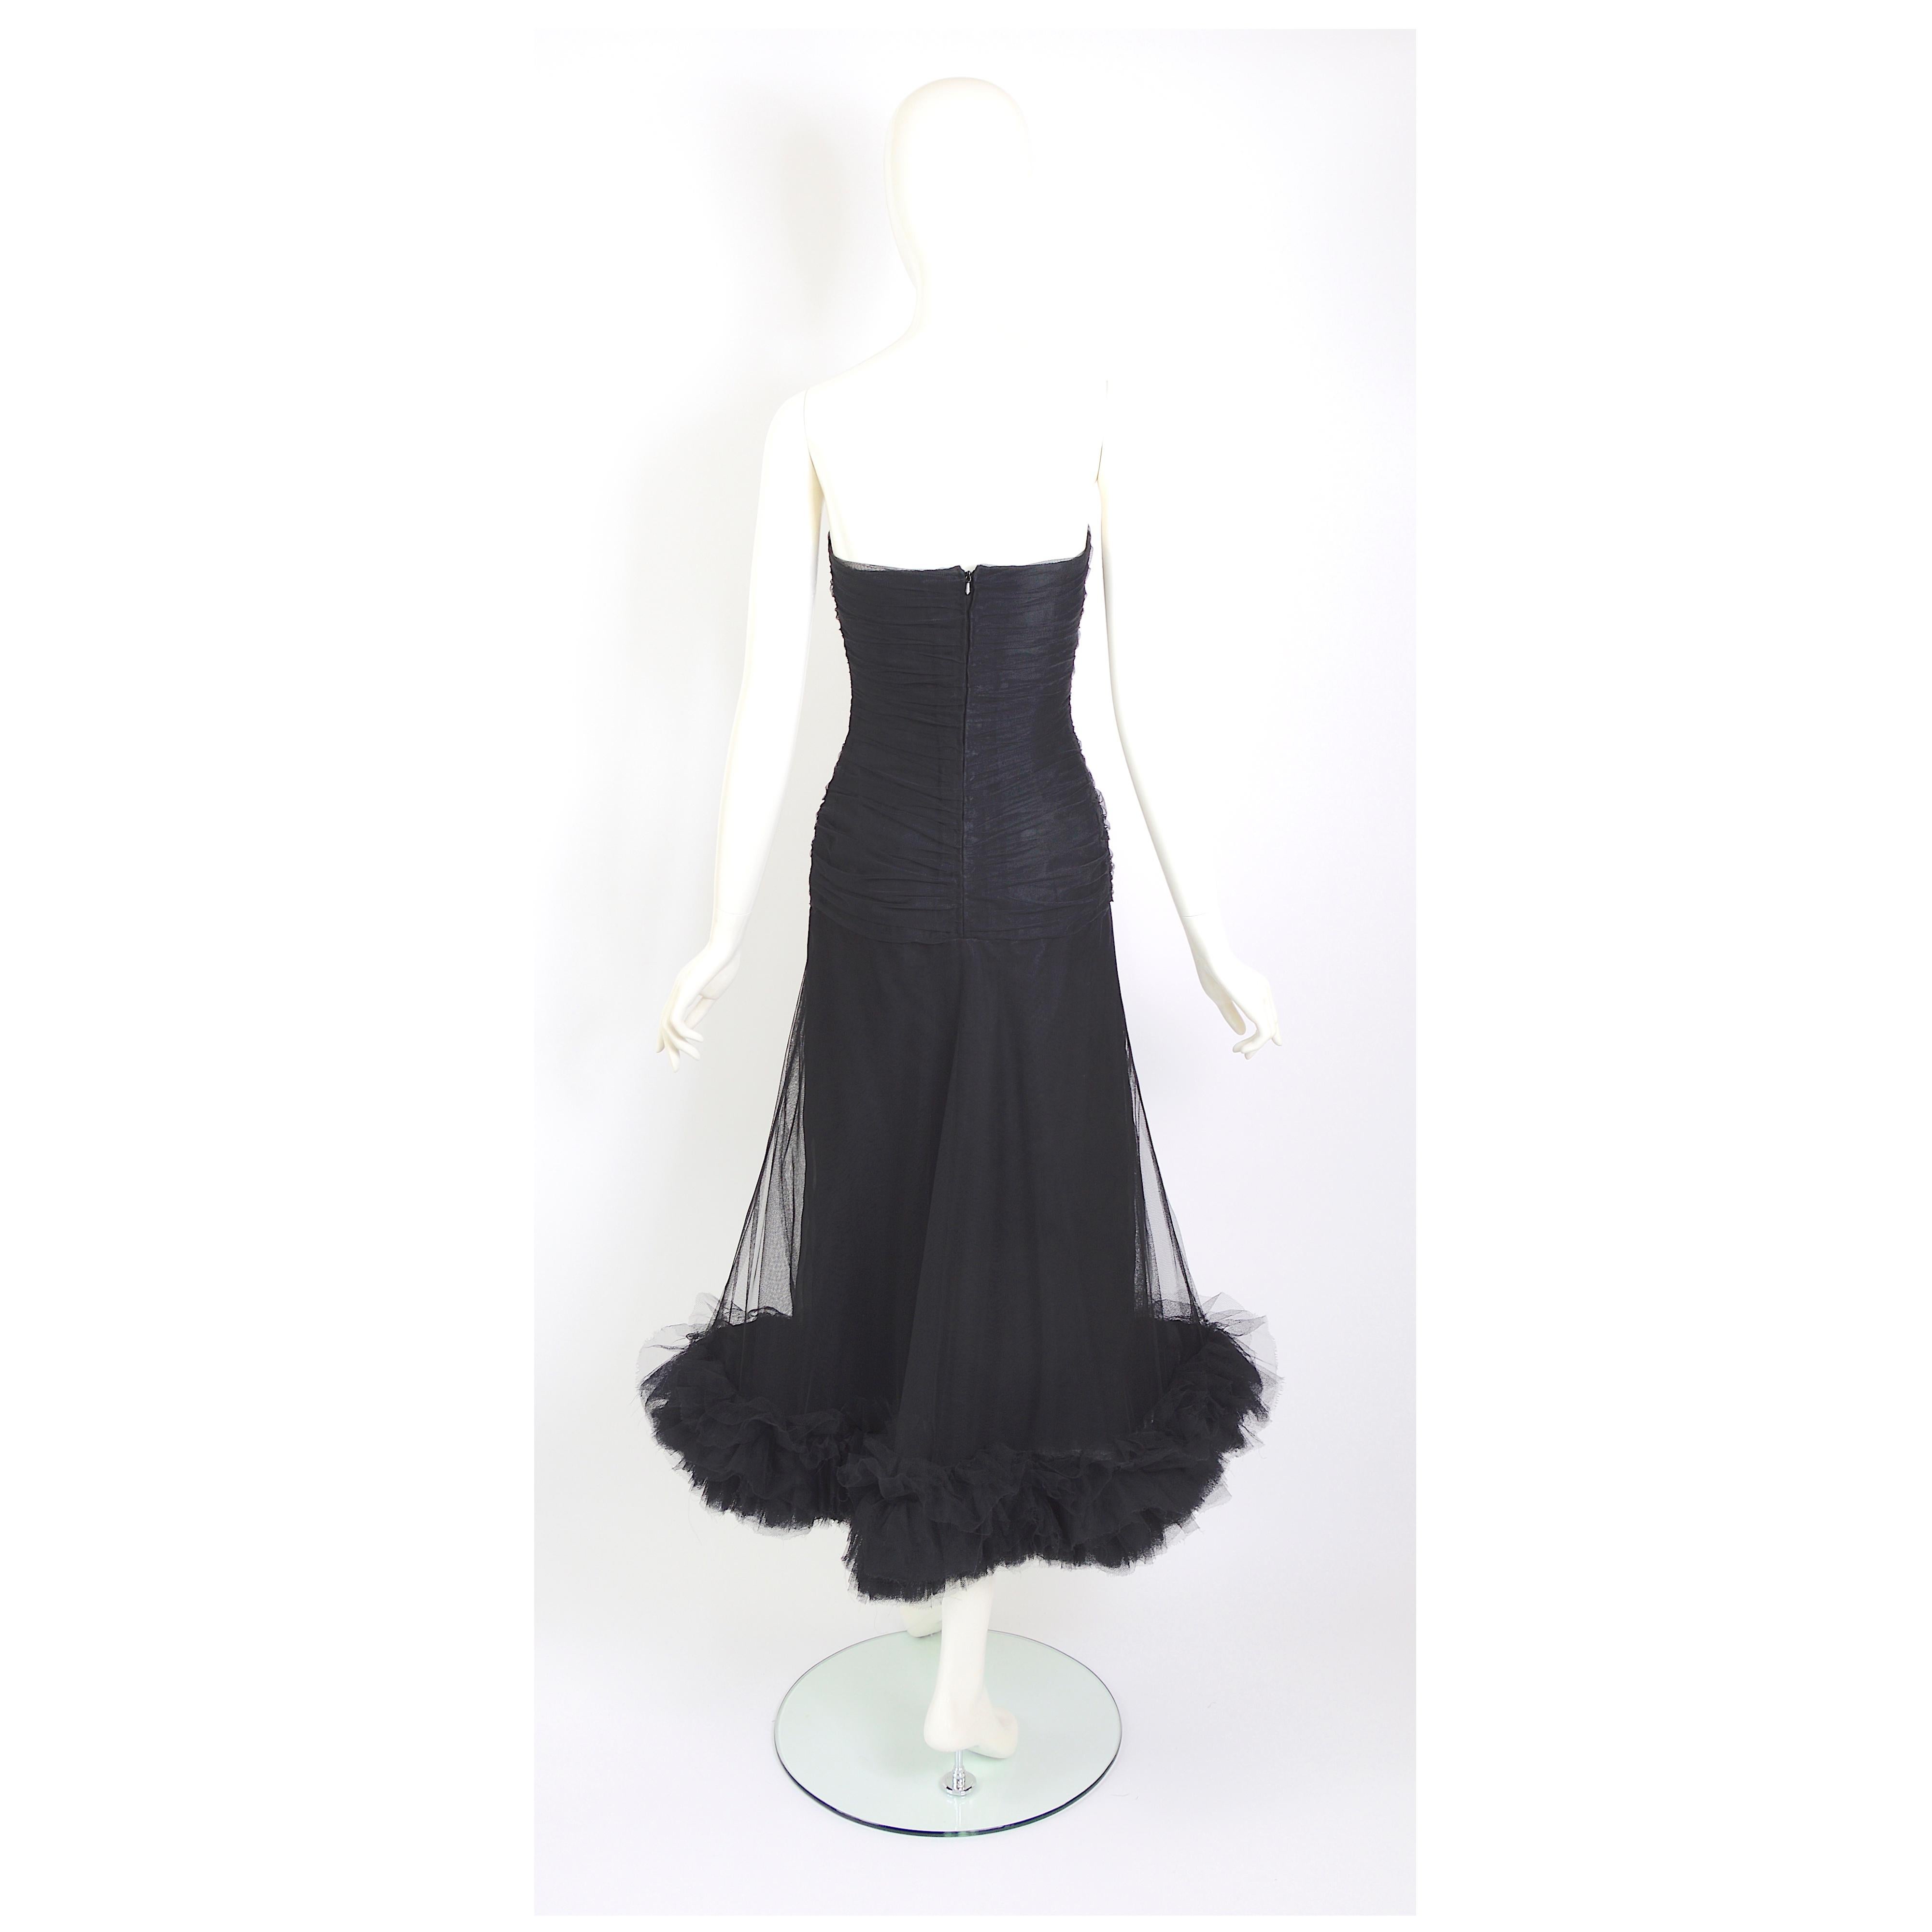 Christian Dior by Marc Bohan vintage numbered couture black tulle evening dress For Sale 2